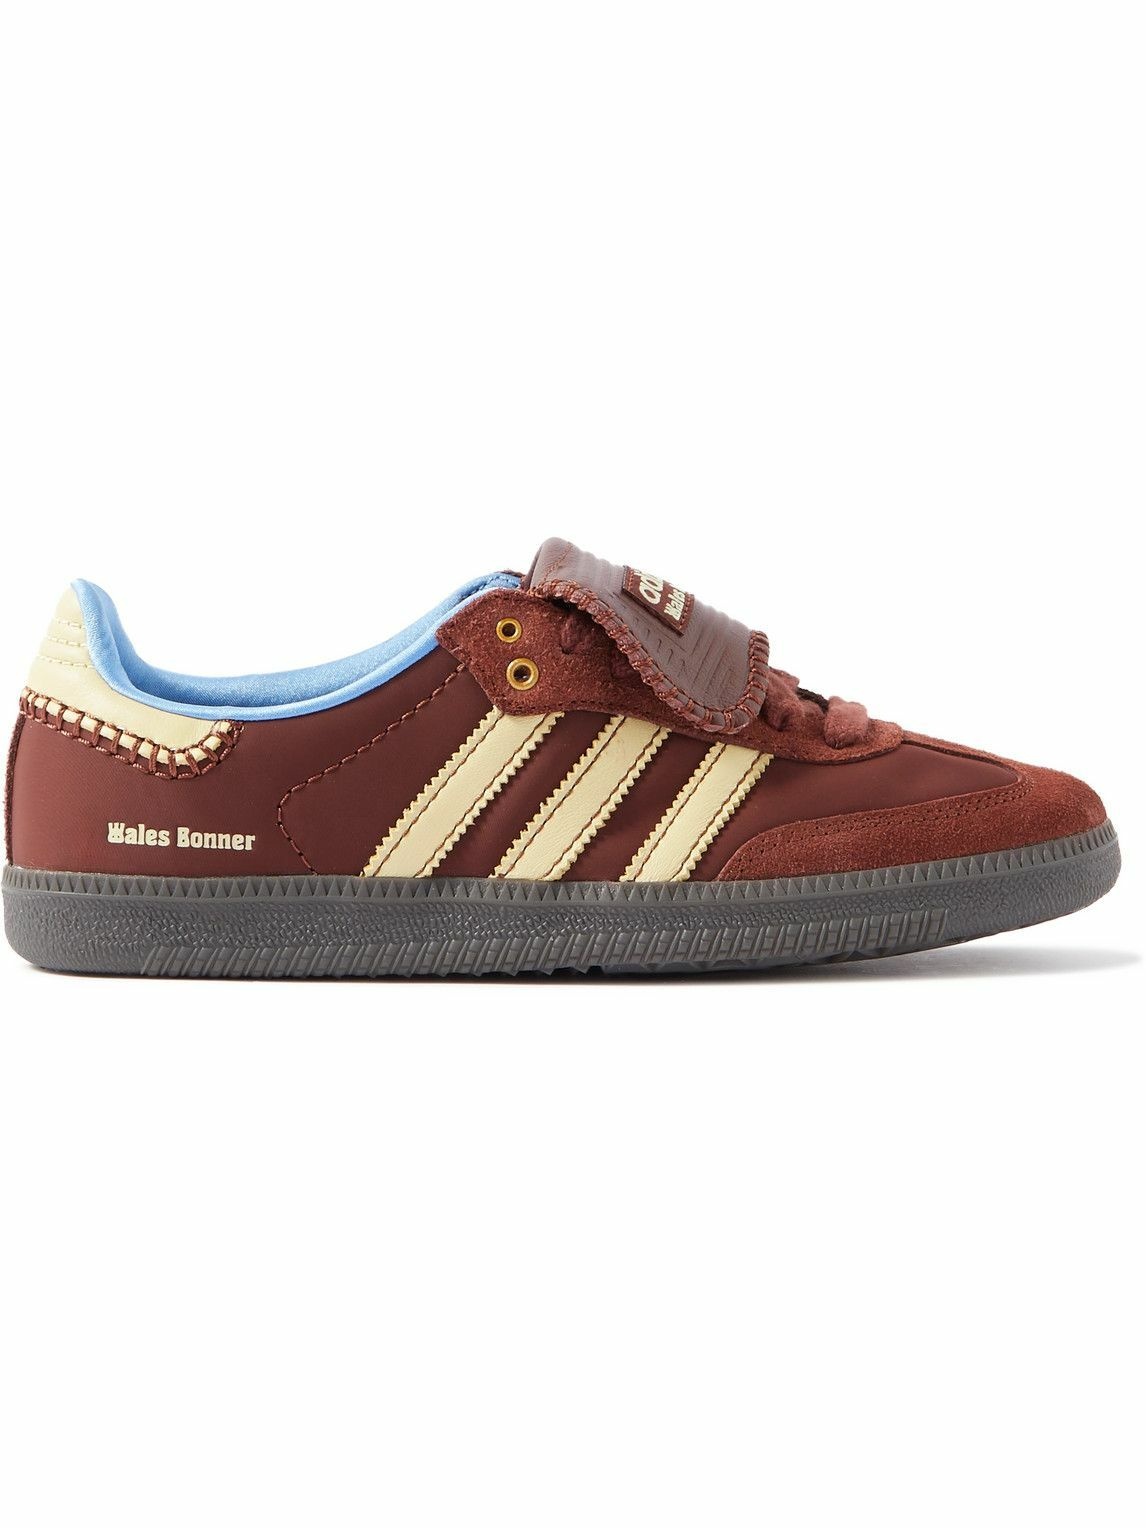 Photo: adidas Consortium - Wales Bonner Samba Suede-Trimmed Leather Sneakers - Brown